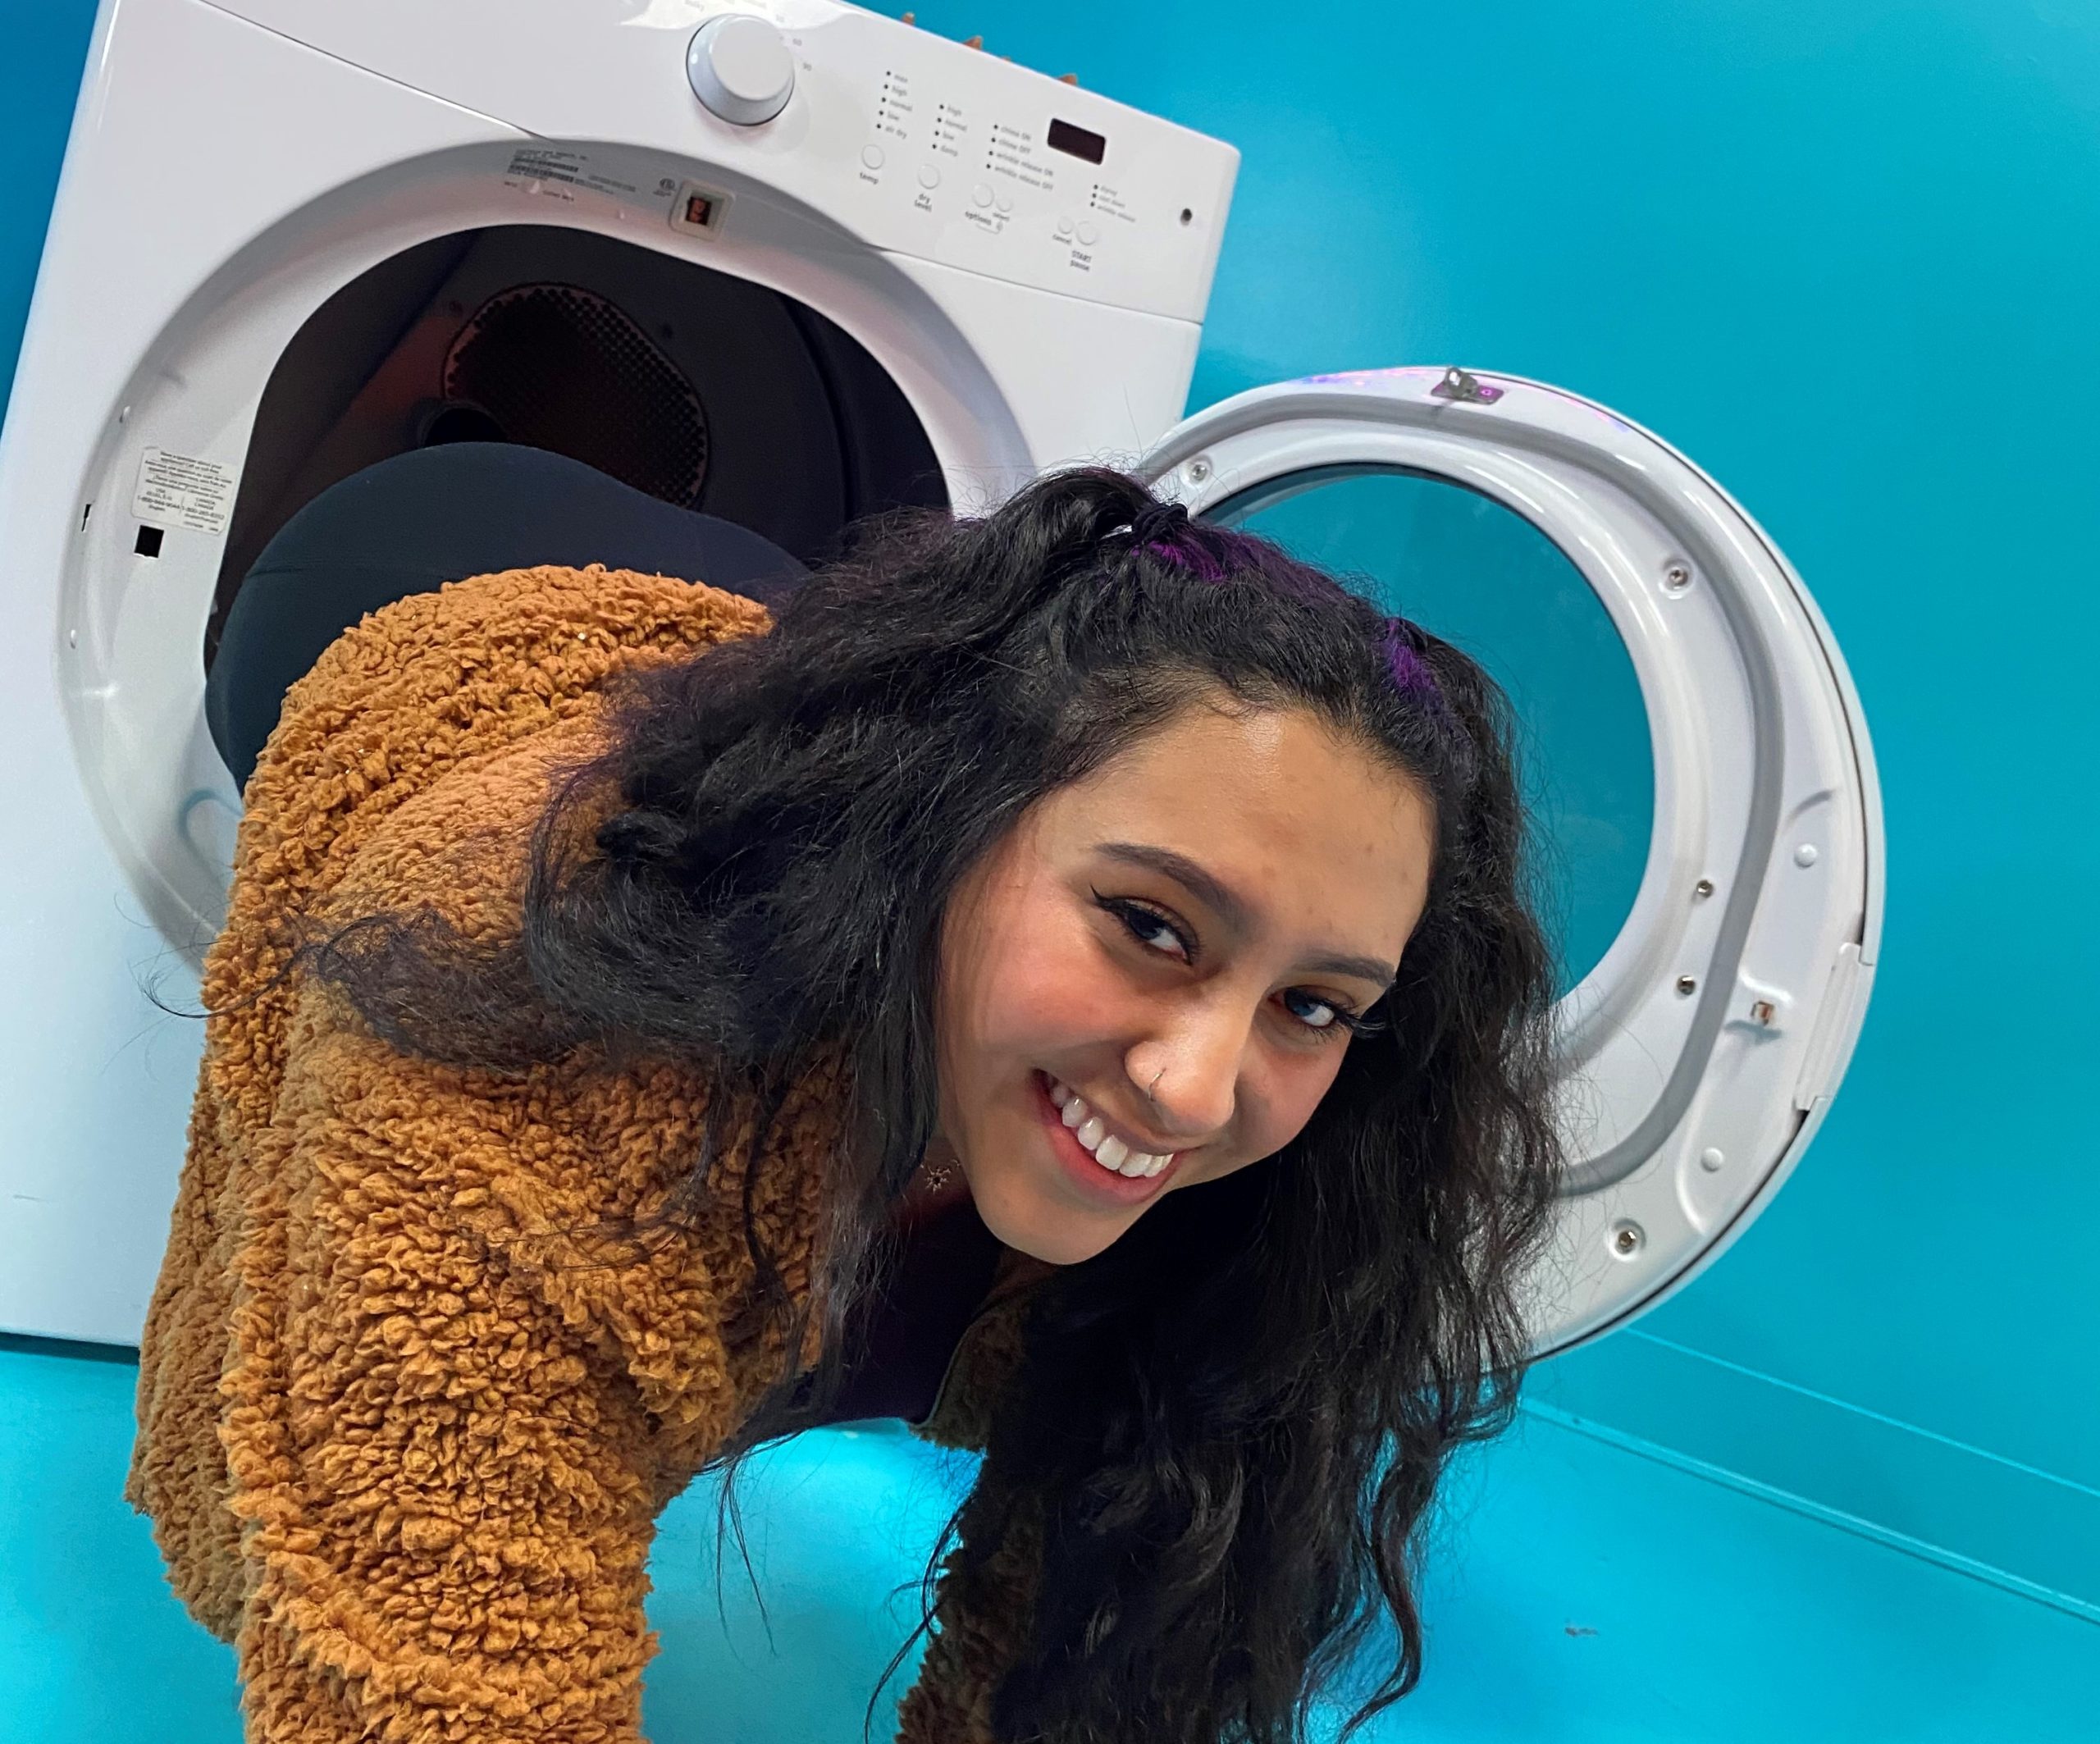 Tali Calles falls out of washing machine art installation at Seattle Selfie Museum.